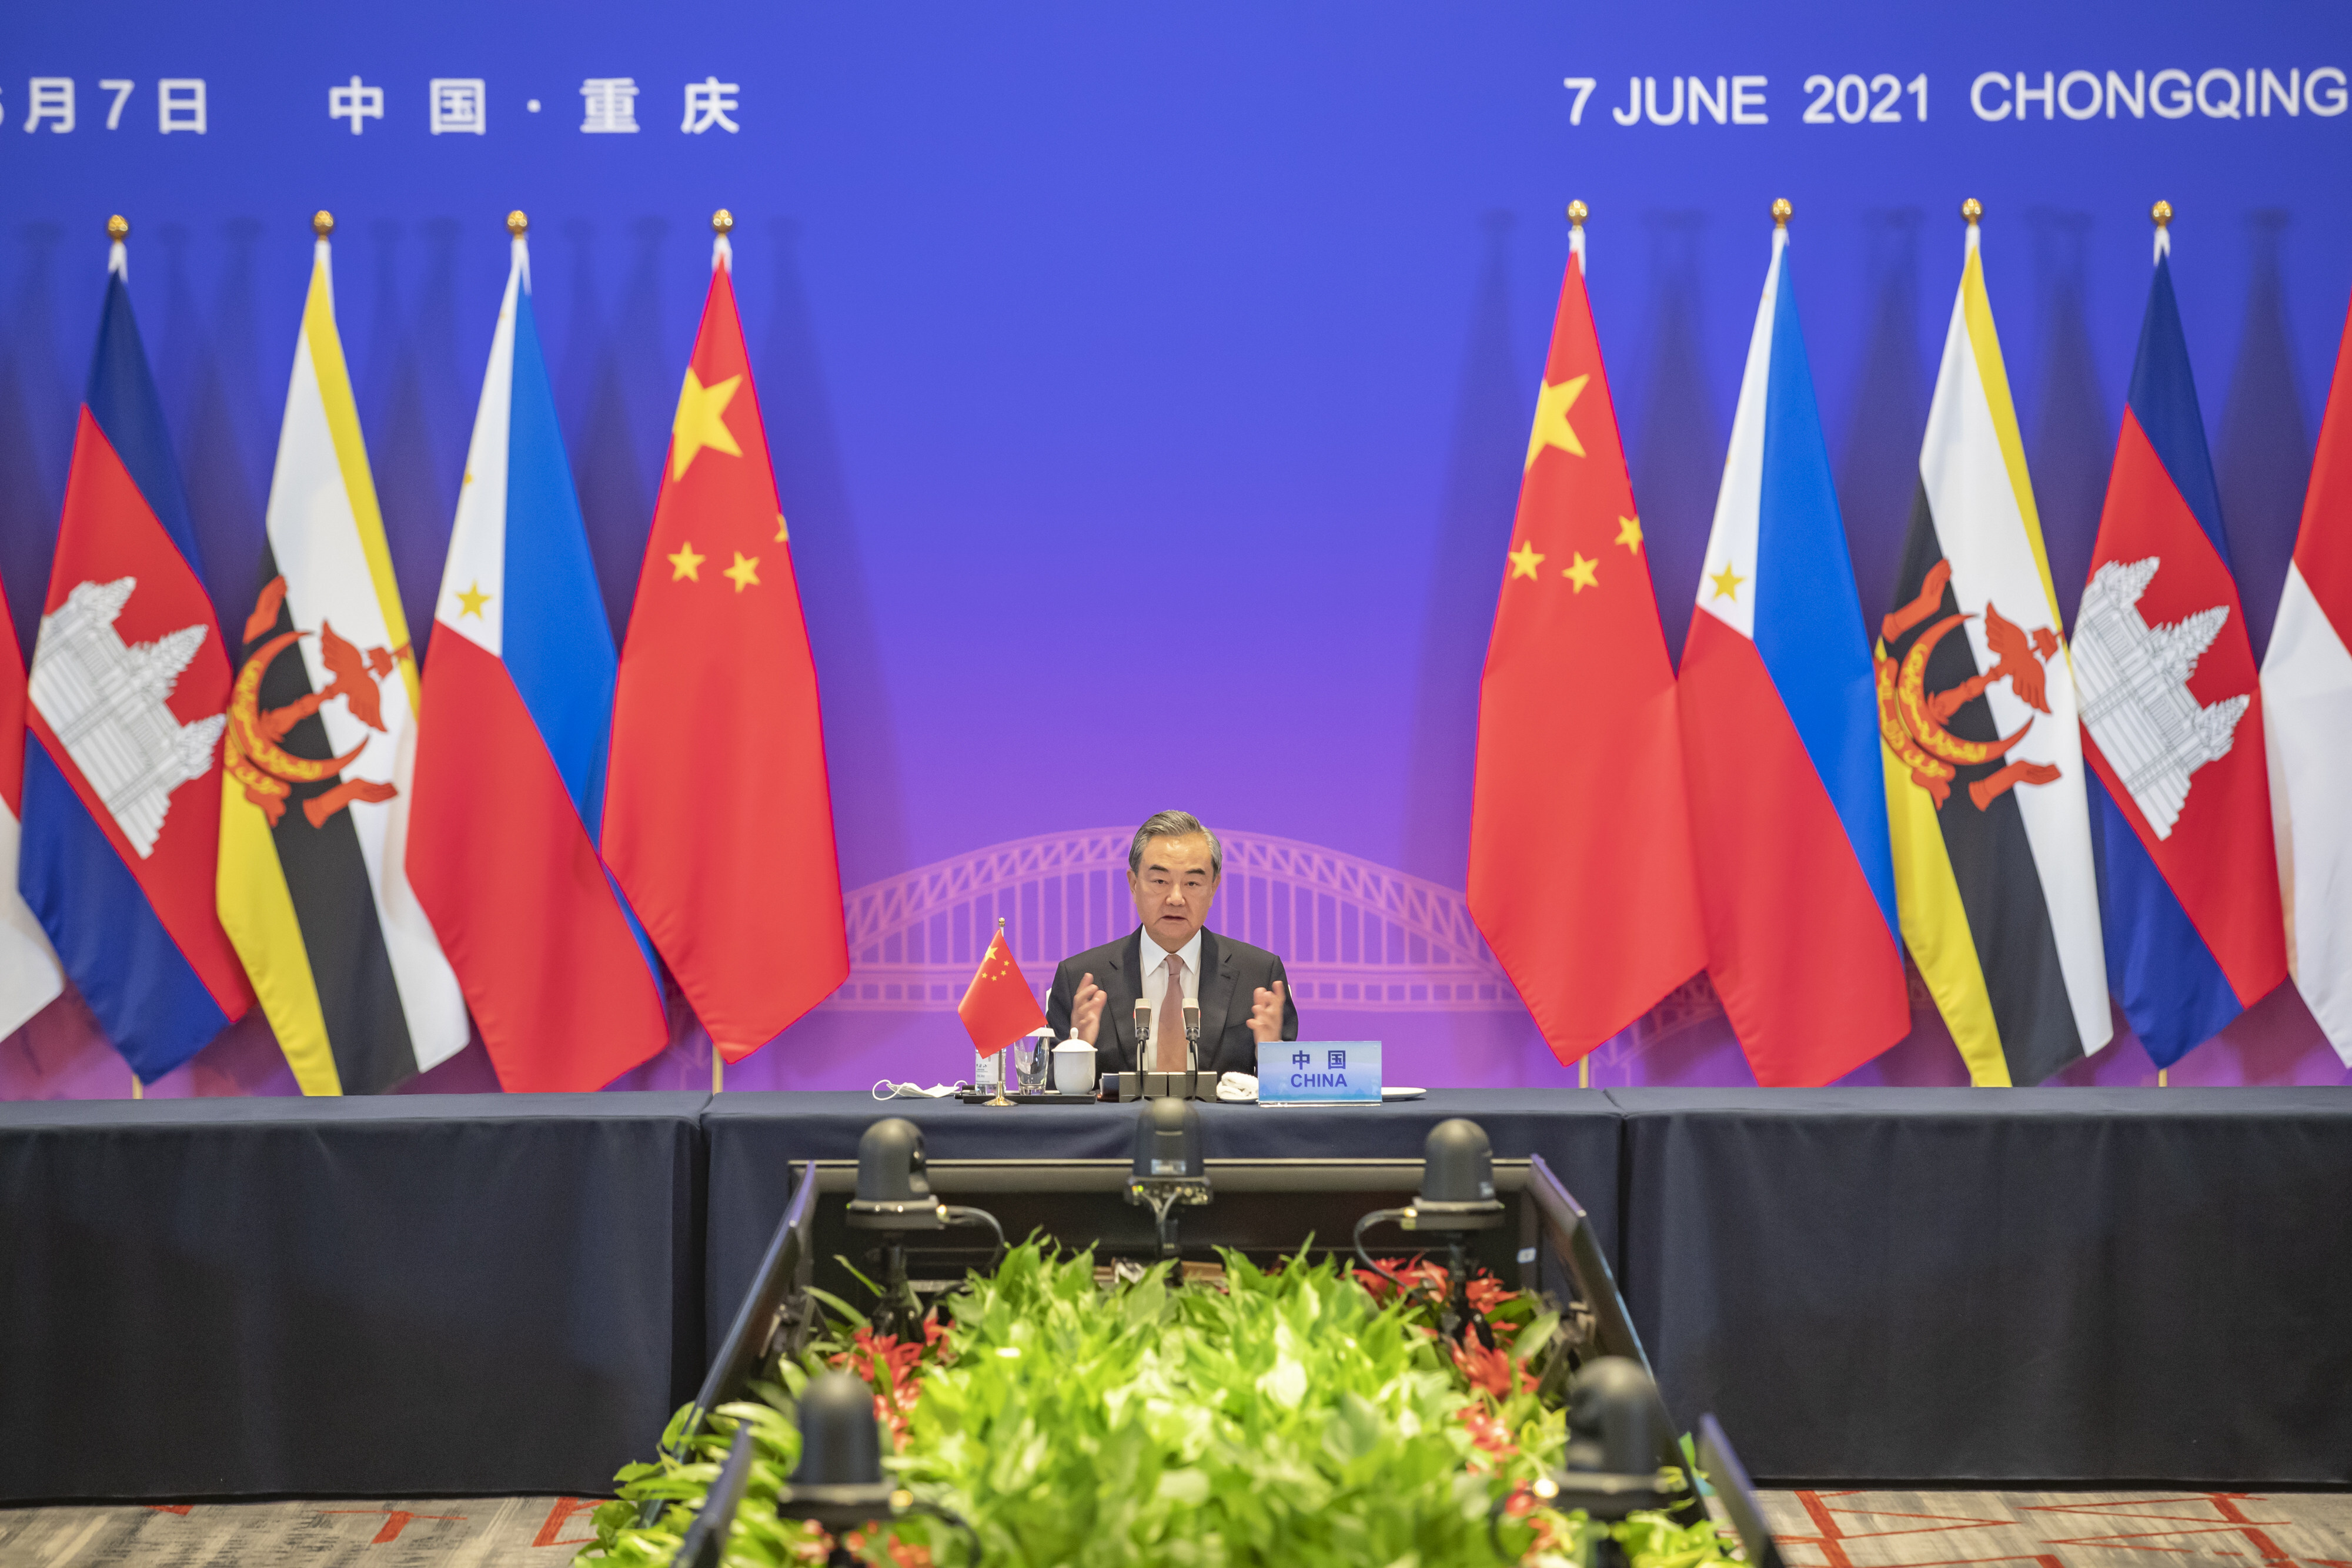 Chinese Foreign Minister Wang Yi attends the special Asean-China foreign ministers’ meeting in Chongqing on June 7. Photo: Xinhua